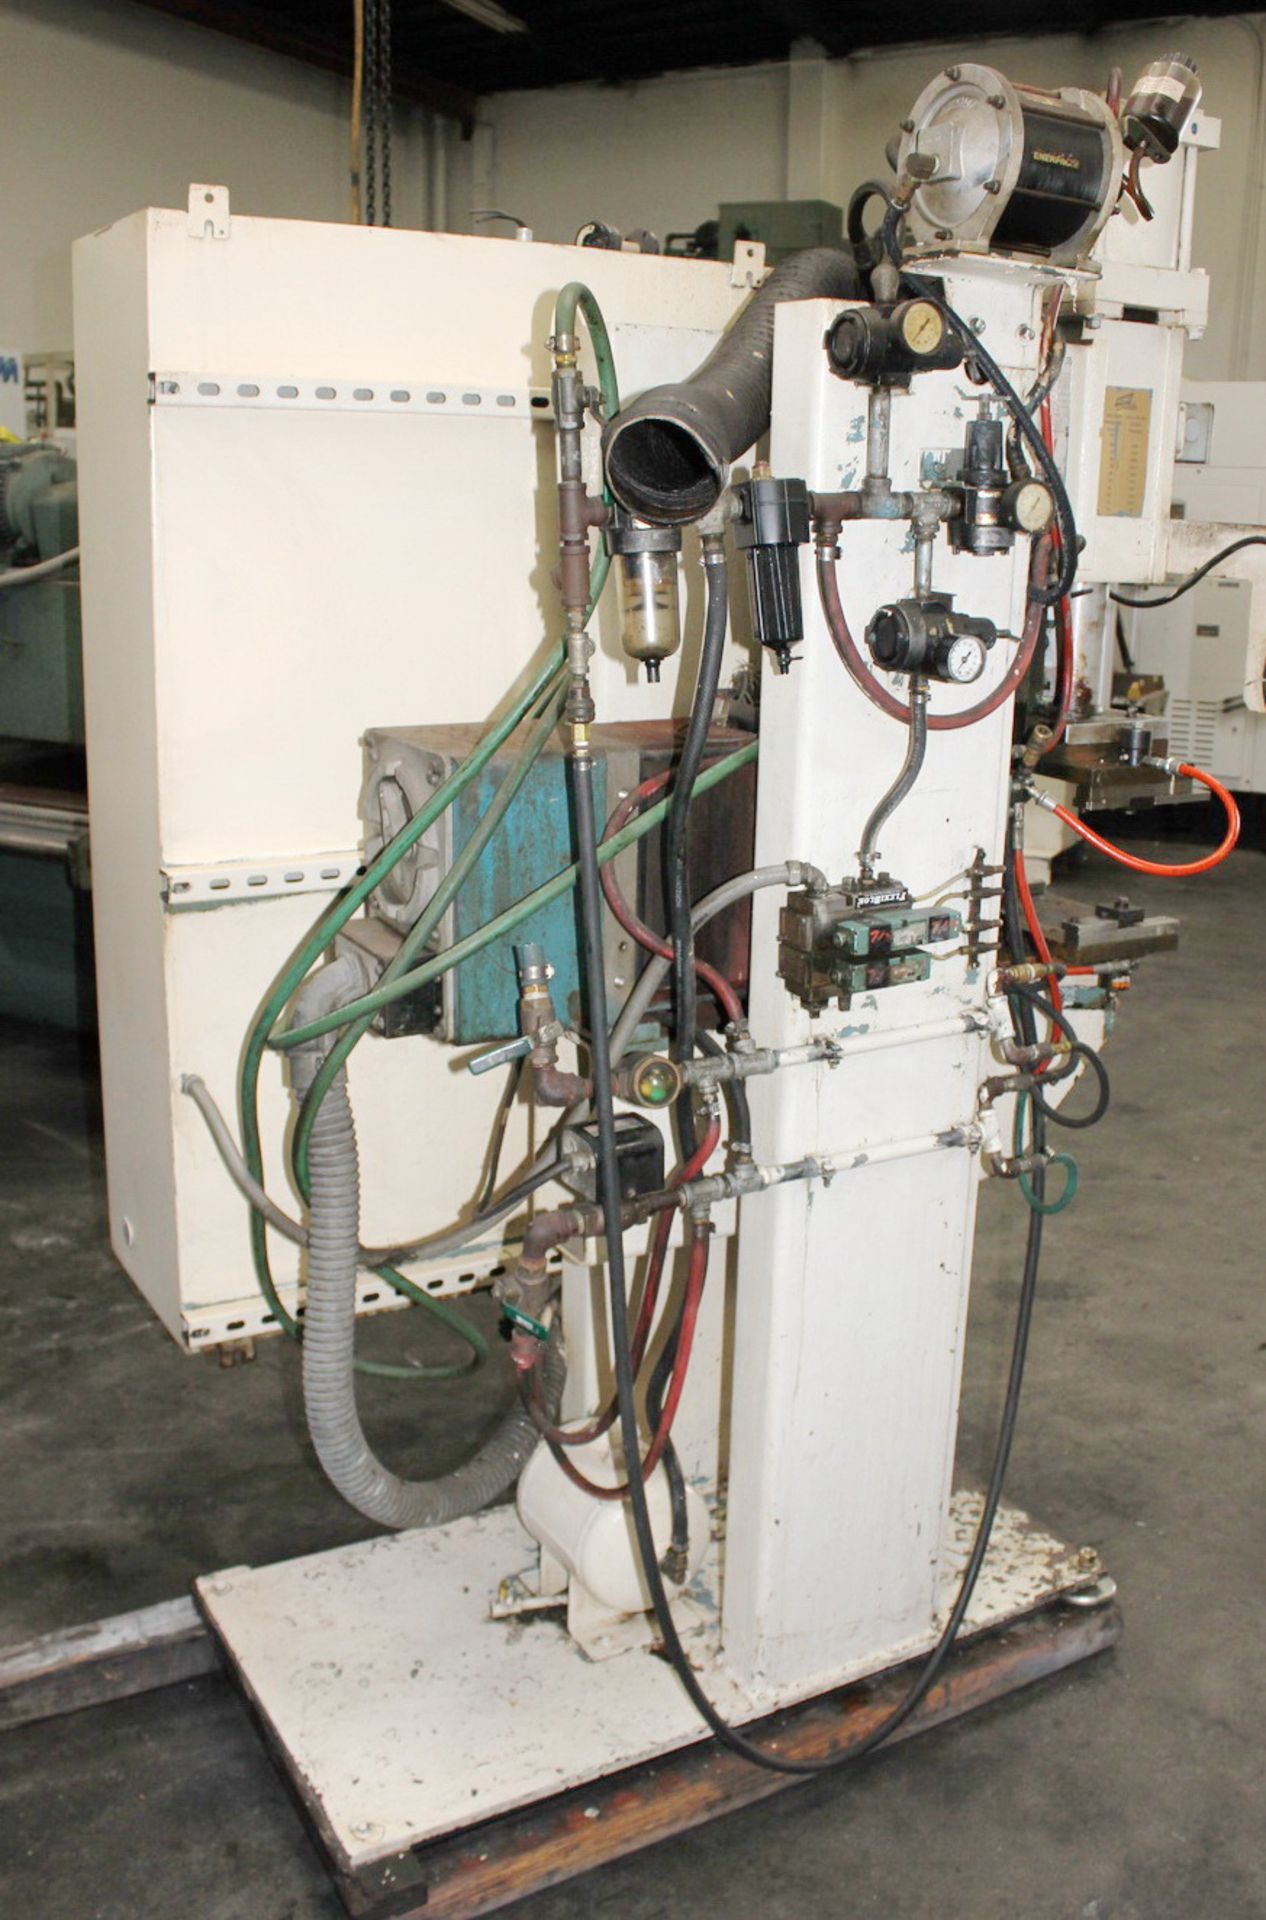 Hoffman Press Type Spot Welder 125 KVA x 14''. LOADING FEE FOR THIS LOT: $150 - Image 6 of 18